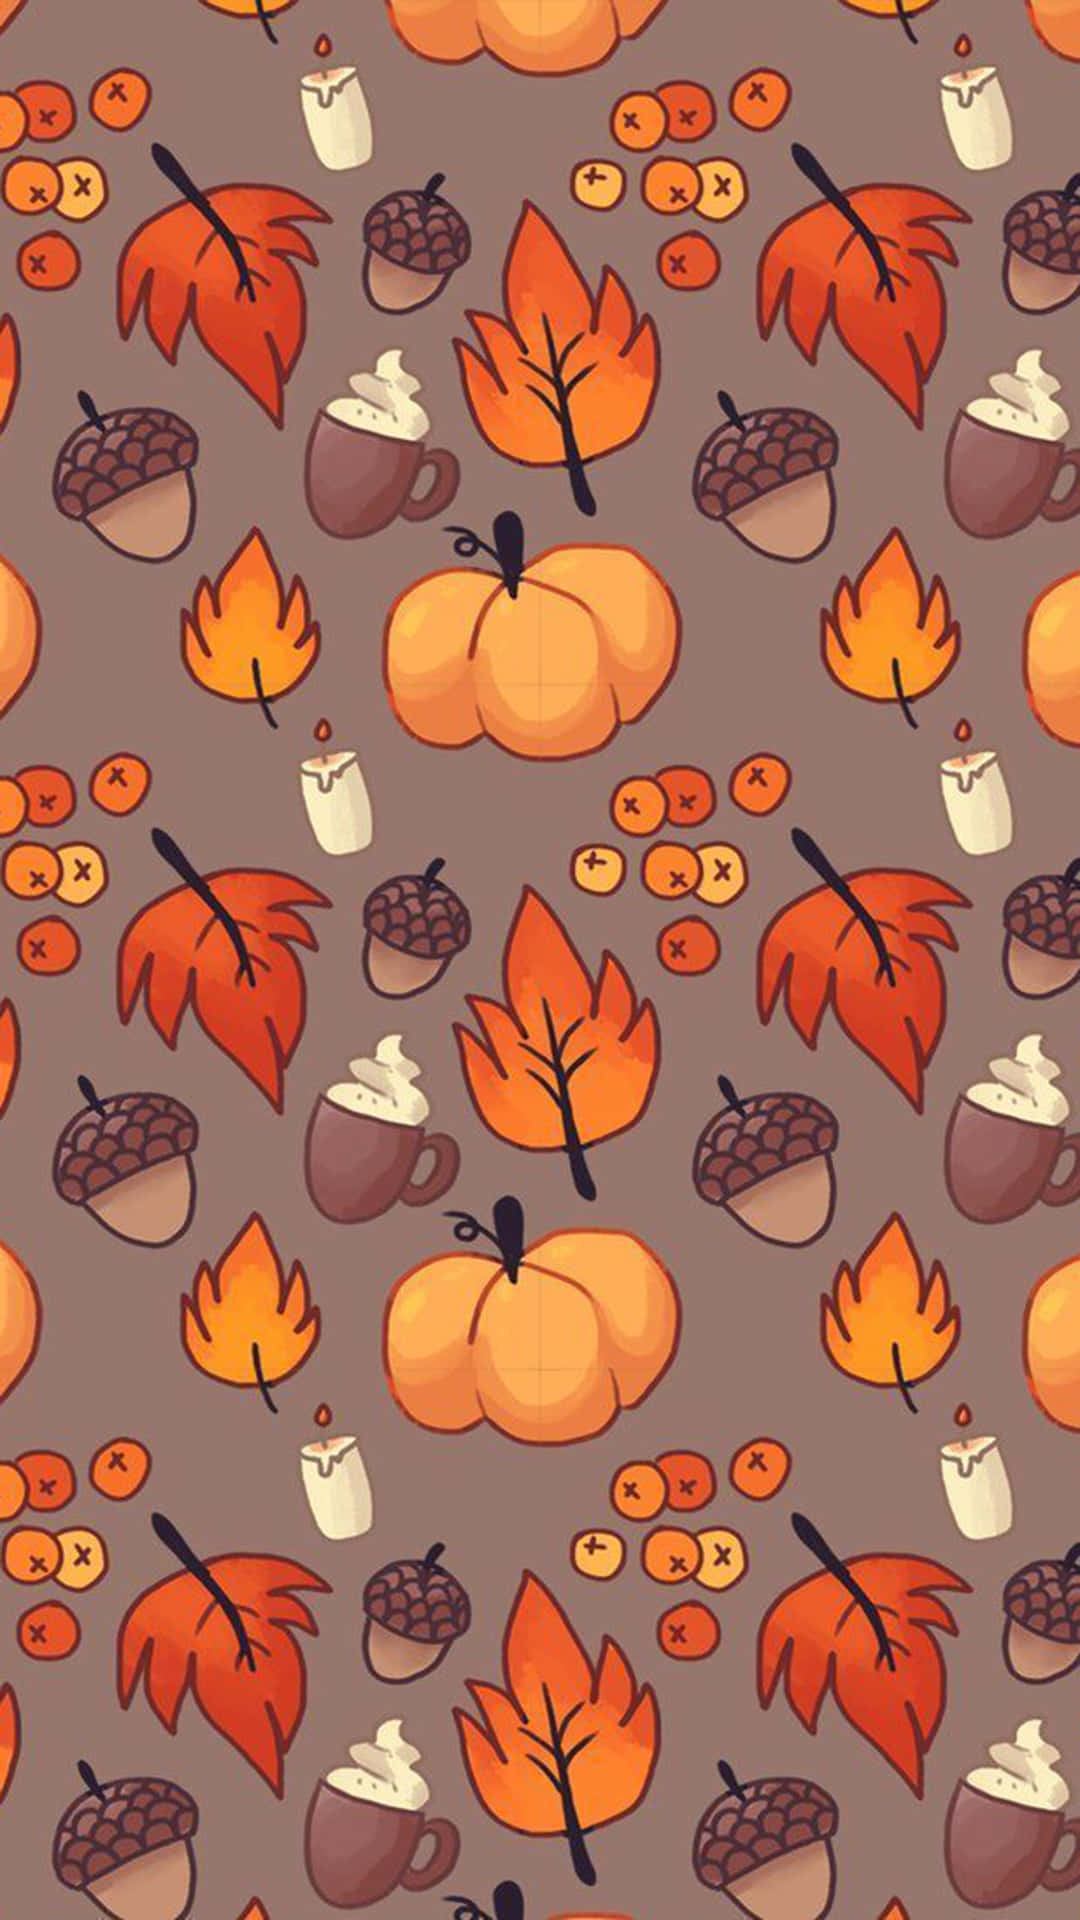 Autumn Leaves And Pumpkins For iPhone Halloween Background